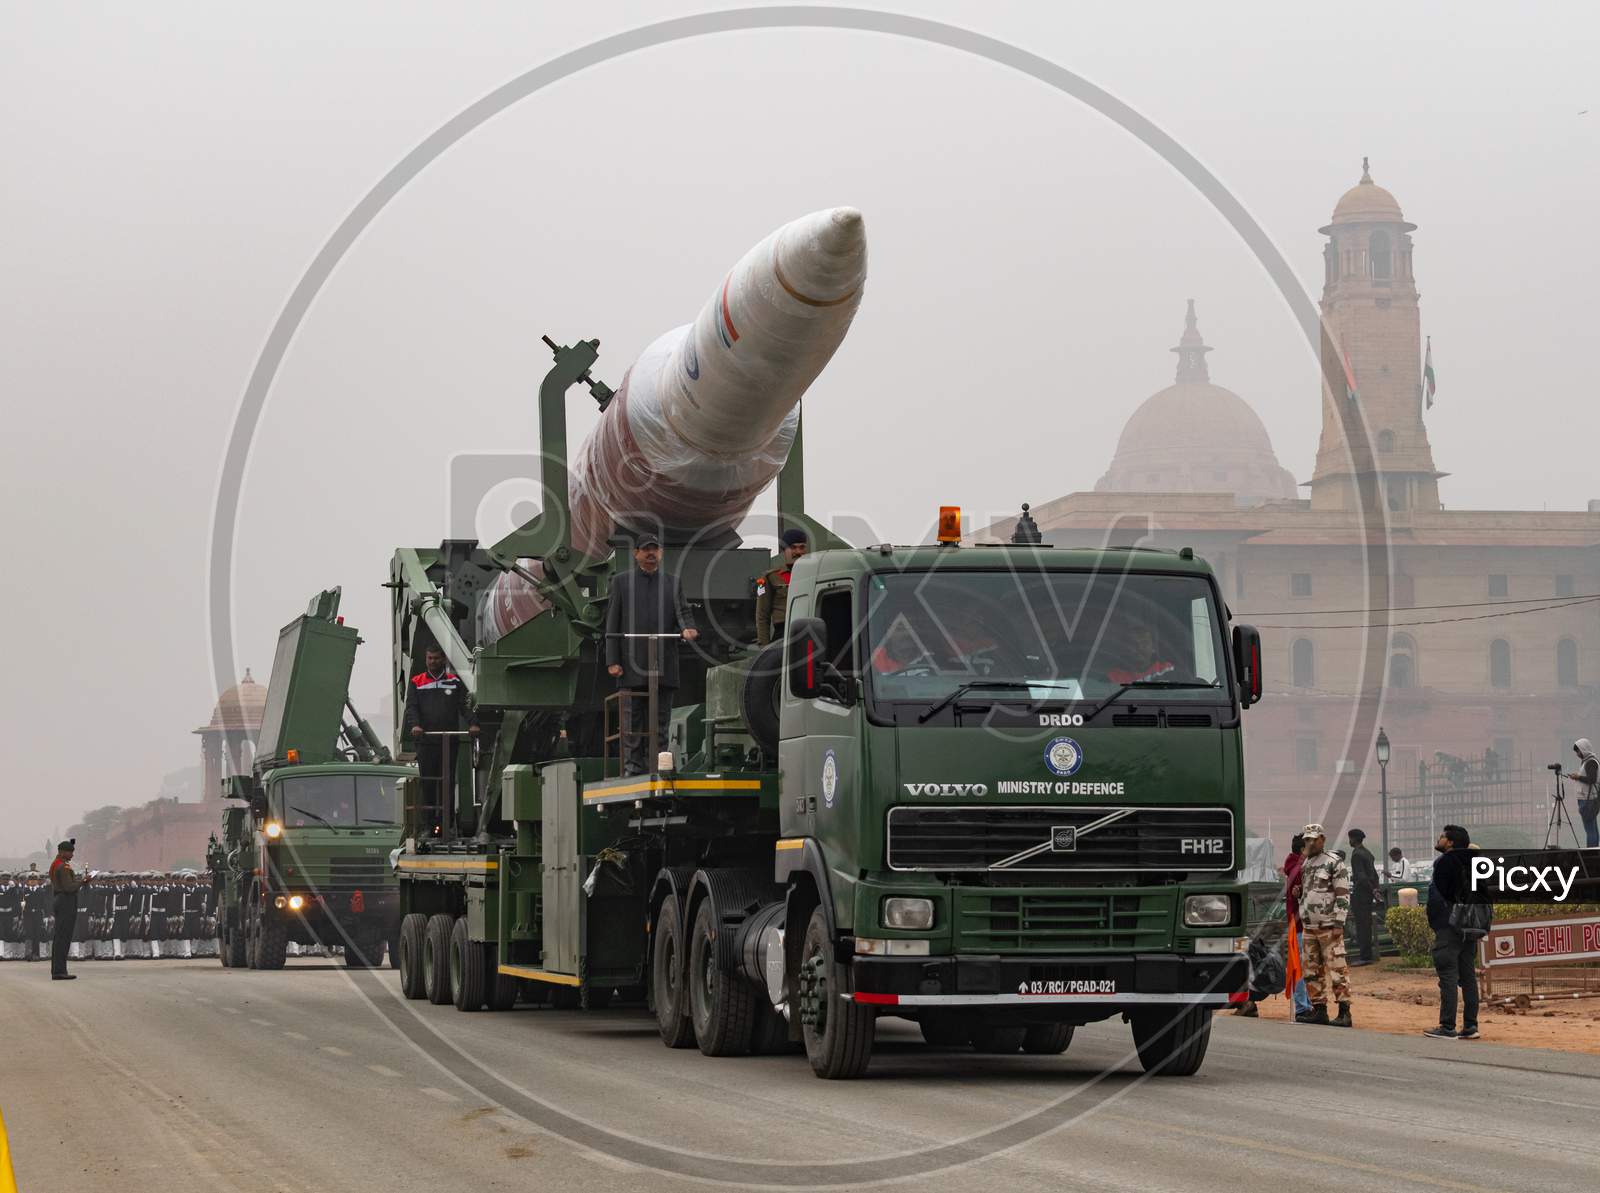 A Demonstration of Mission Shakti during parade rehearsal for 71st republic Day 2020